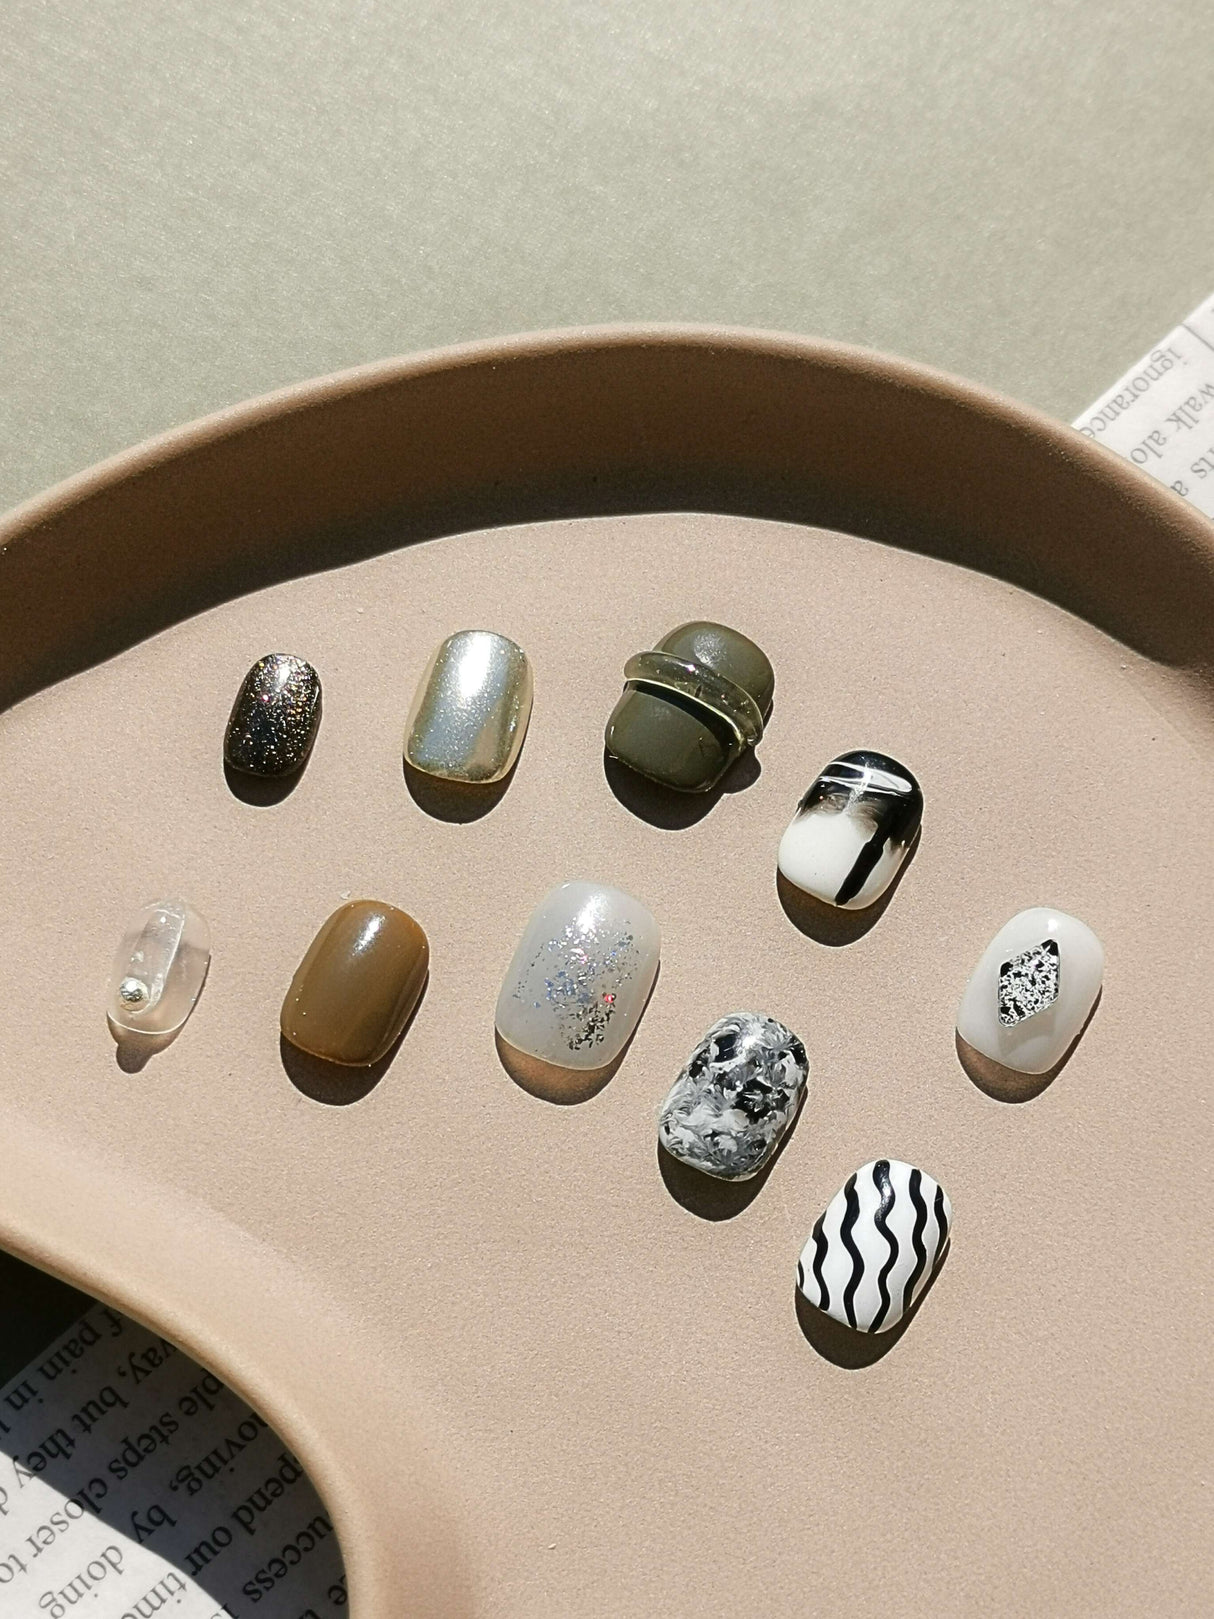 Nail art enthusiasts can use These press-on nails for inspiration or replicate the designs. They include color, pattern, texture, embellishments, and glitter. Perfect for personal or professional use.